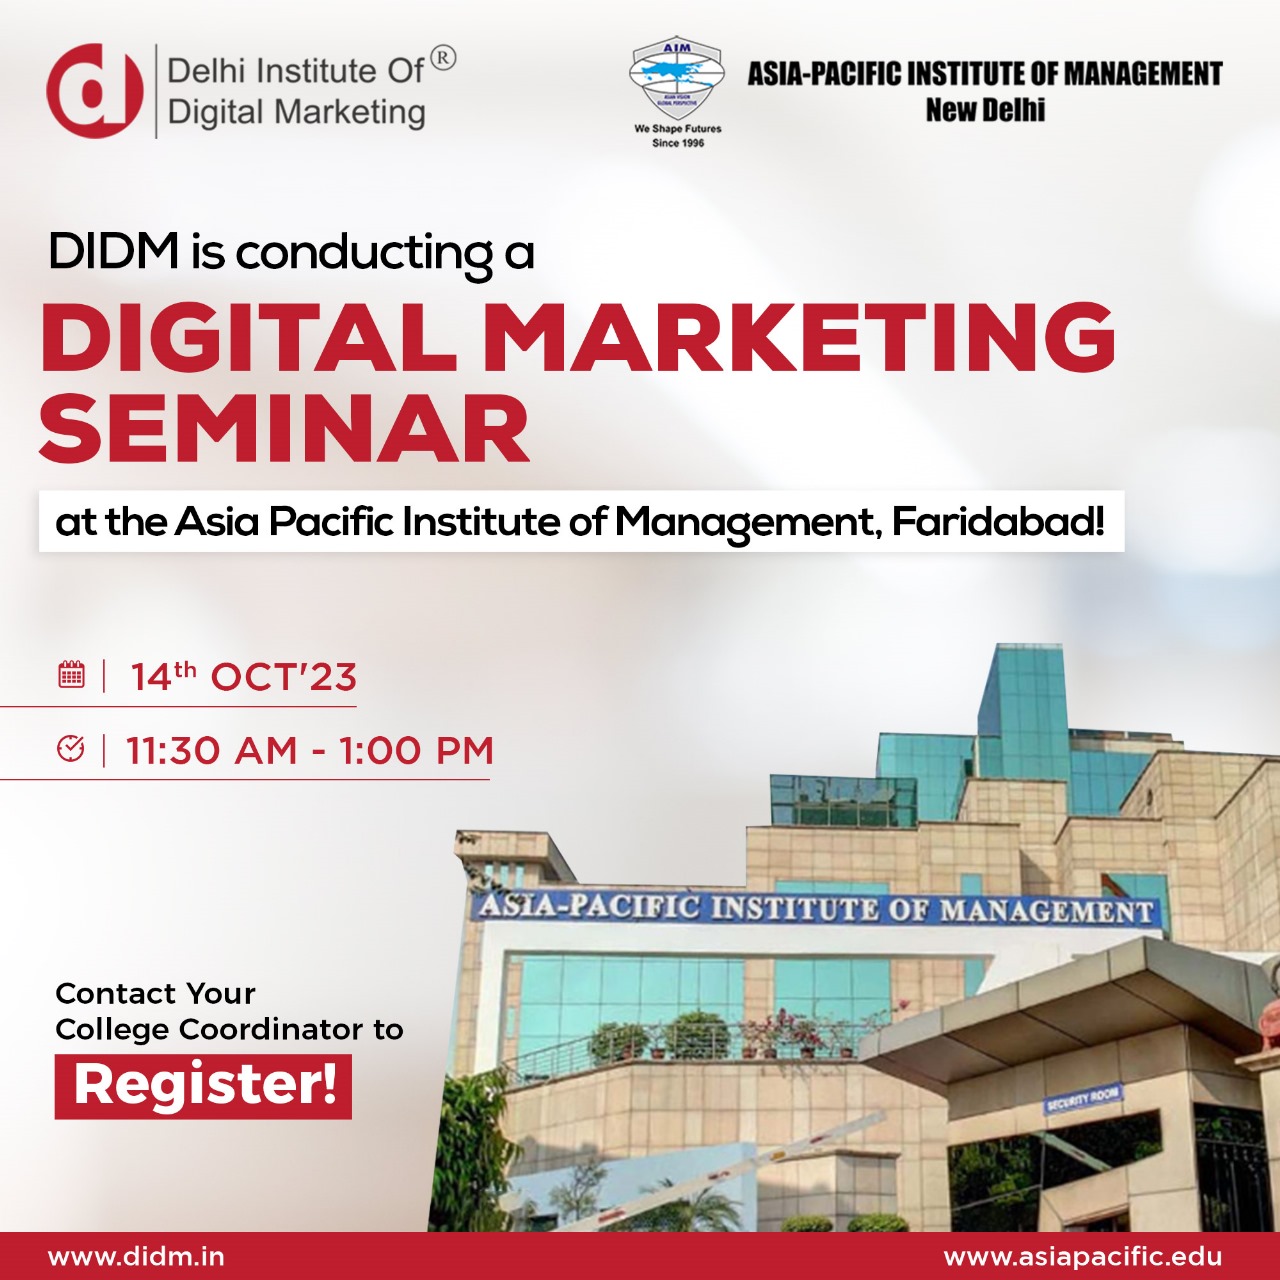 DIDM Conducting a Digital Marketing Seminar at the Asia Pacific Institute of Management